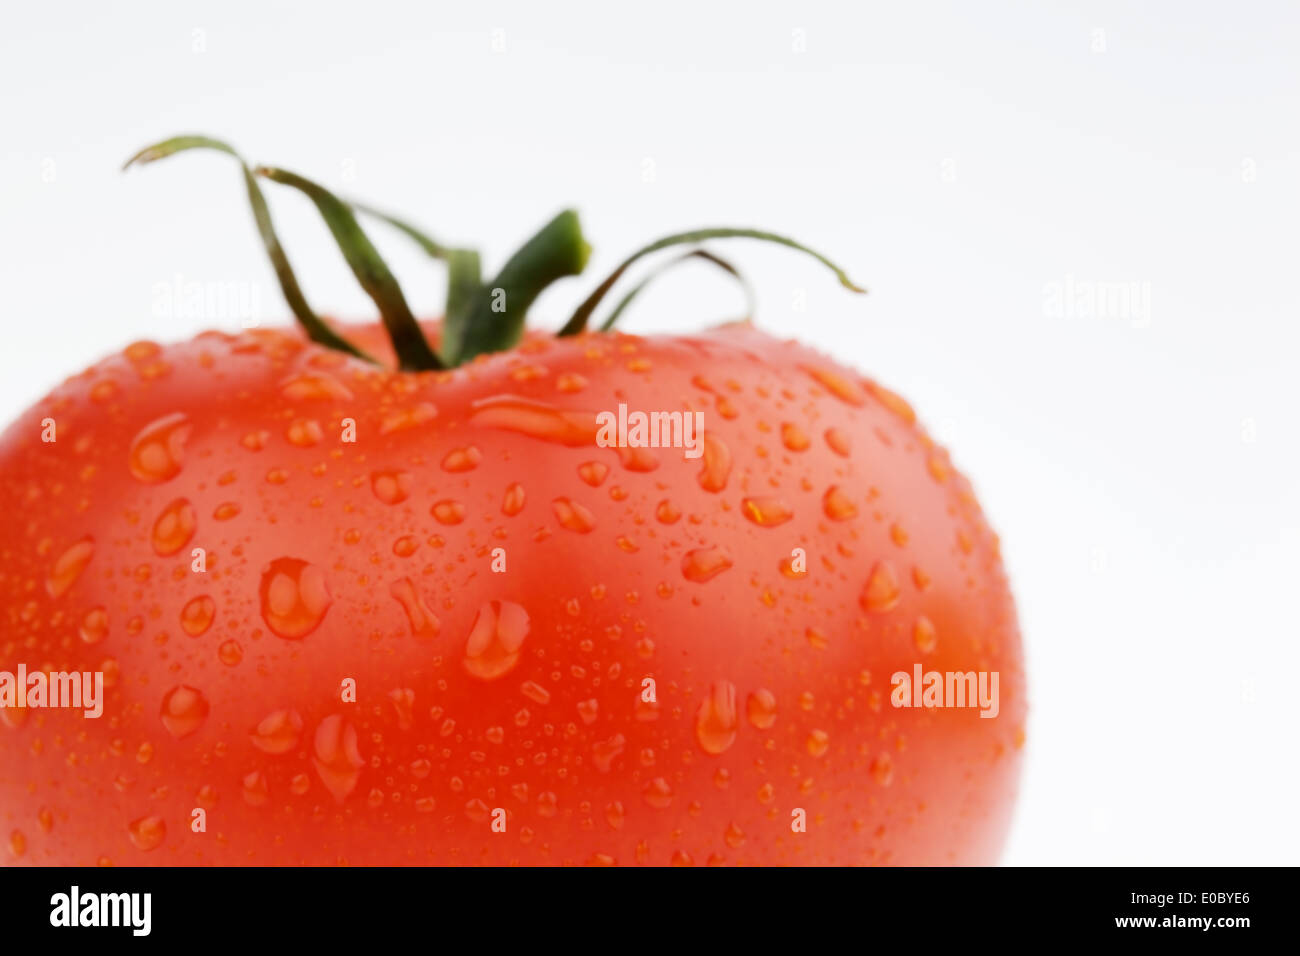 Tomato tomatoes Paradeiser food vegetables vegetarians vegetarian healthy healthy healthy biology organic vegetables biologicall Stock Photo